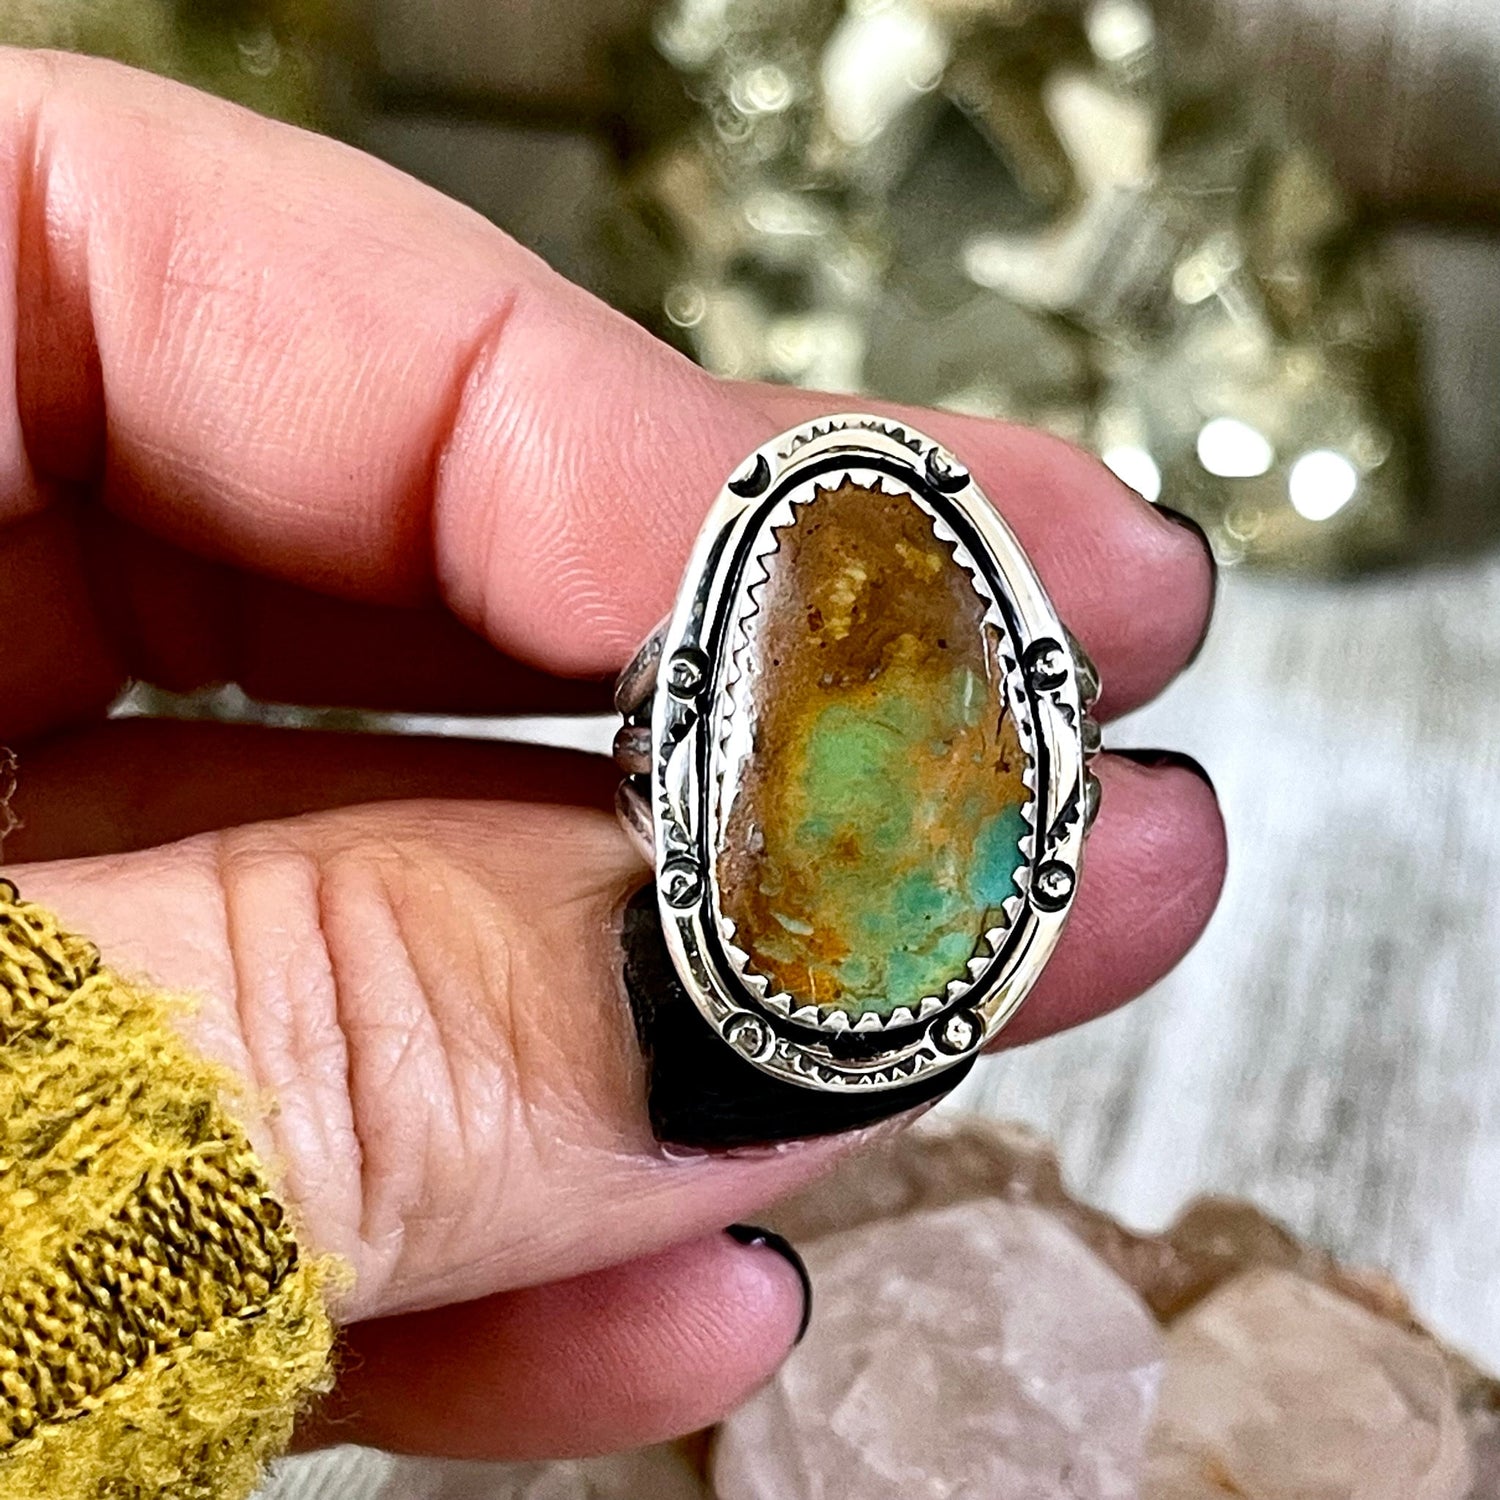 Size 7.5 Kingman Turquoise Statement Ring Set in Thick Sterling Silver / Curated by FOXLARK Collection